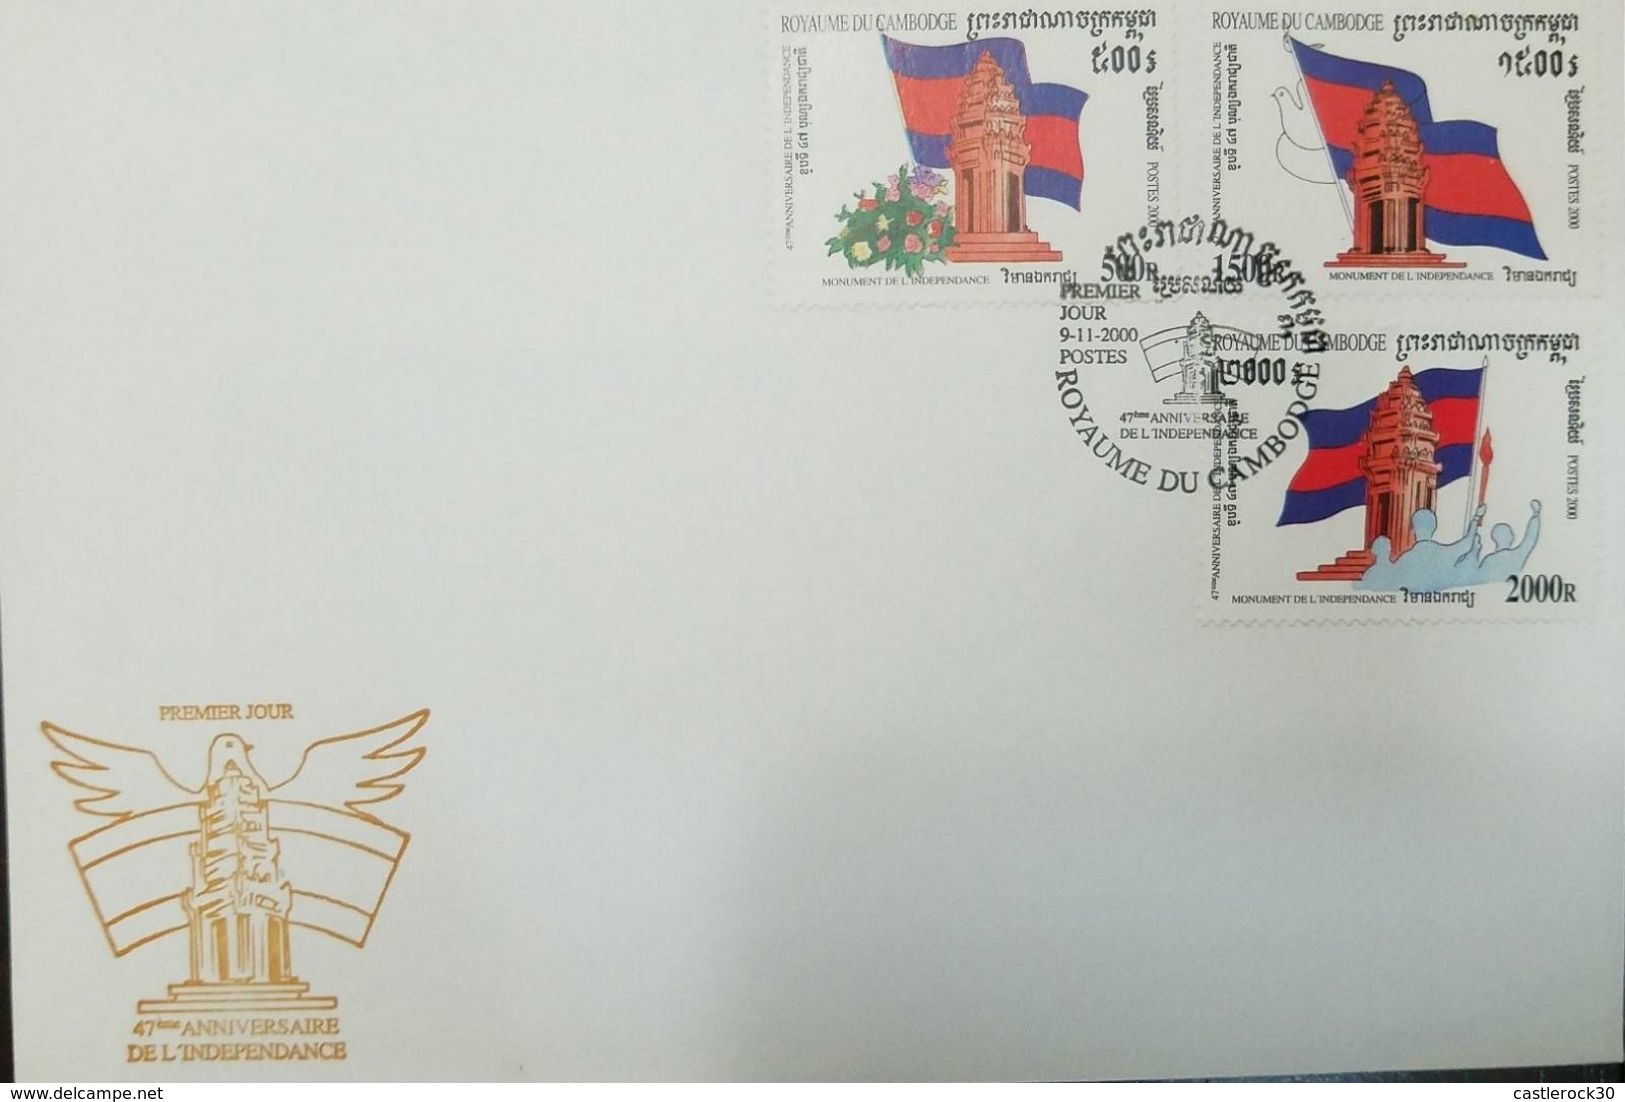 L) 2000 CAMBODIA, MONUMENT OF INDEPENDENCE, 47 ANNIVERSARY, ARCHITECTURE, FLAG, FLOWERS, PEOPLE, FDC - Cambodge